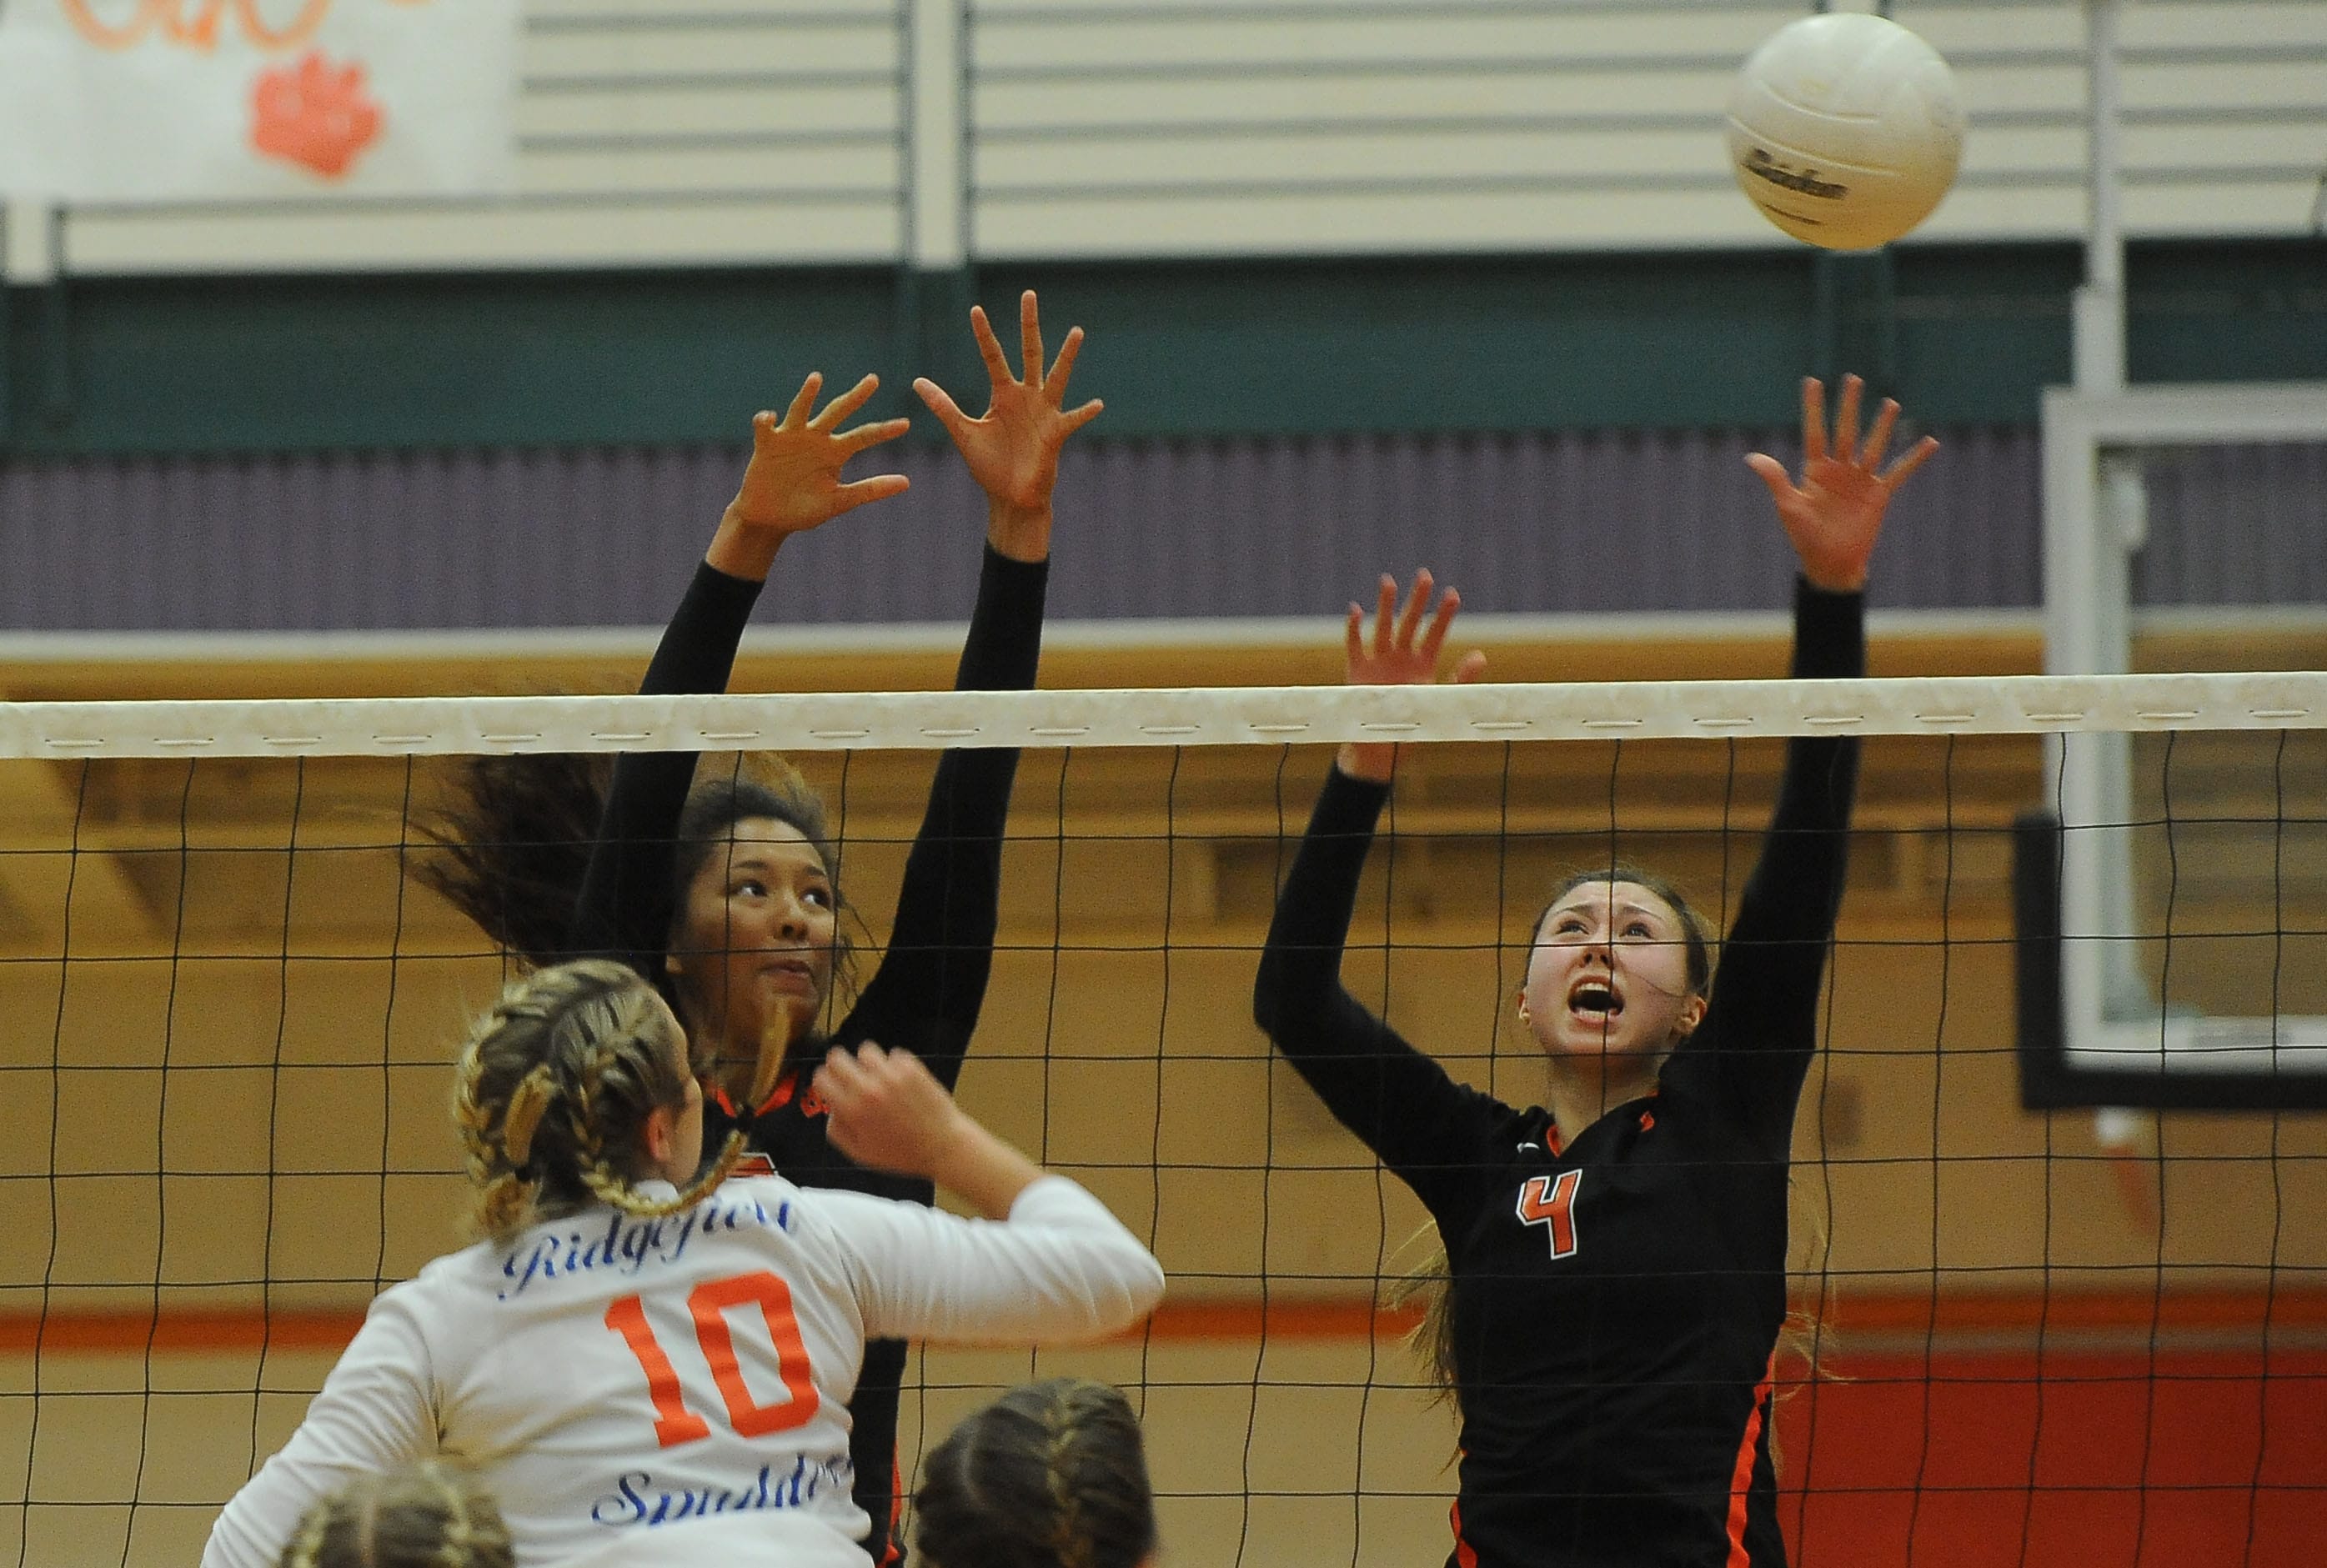 Battle Ground High School's  Ashley Watkins (C) and Kimberly Lasley (R) defend the net against Ridgefield's Madi Harter (L) at a volleyball in Battle Ground Thursday September 10, 2015.